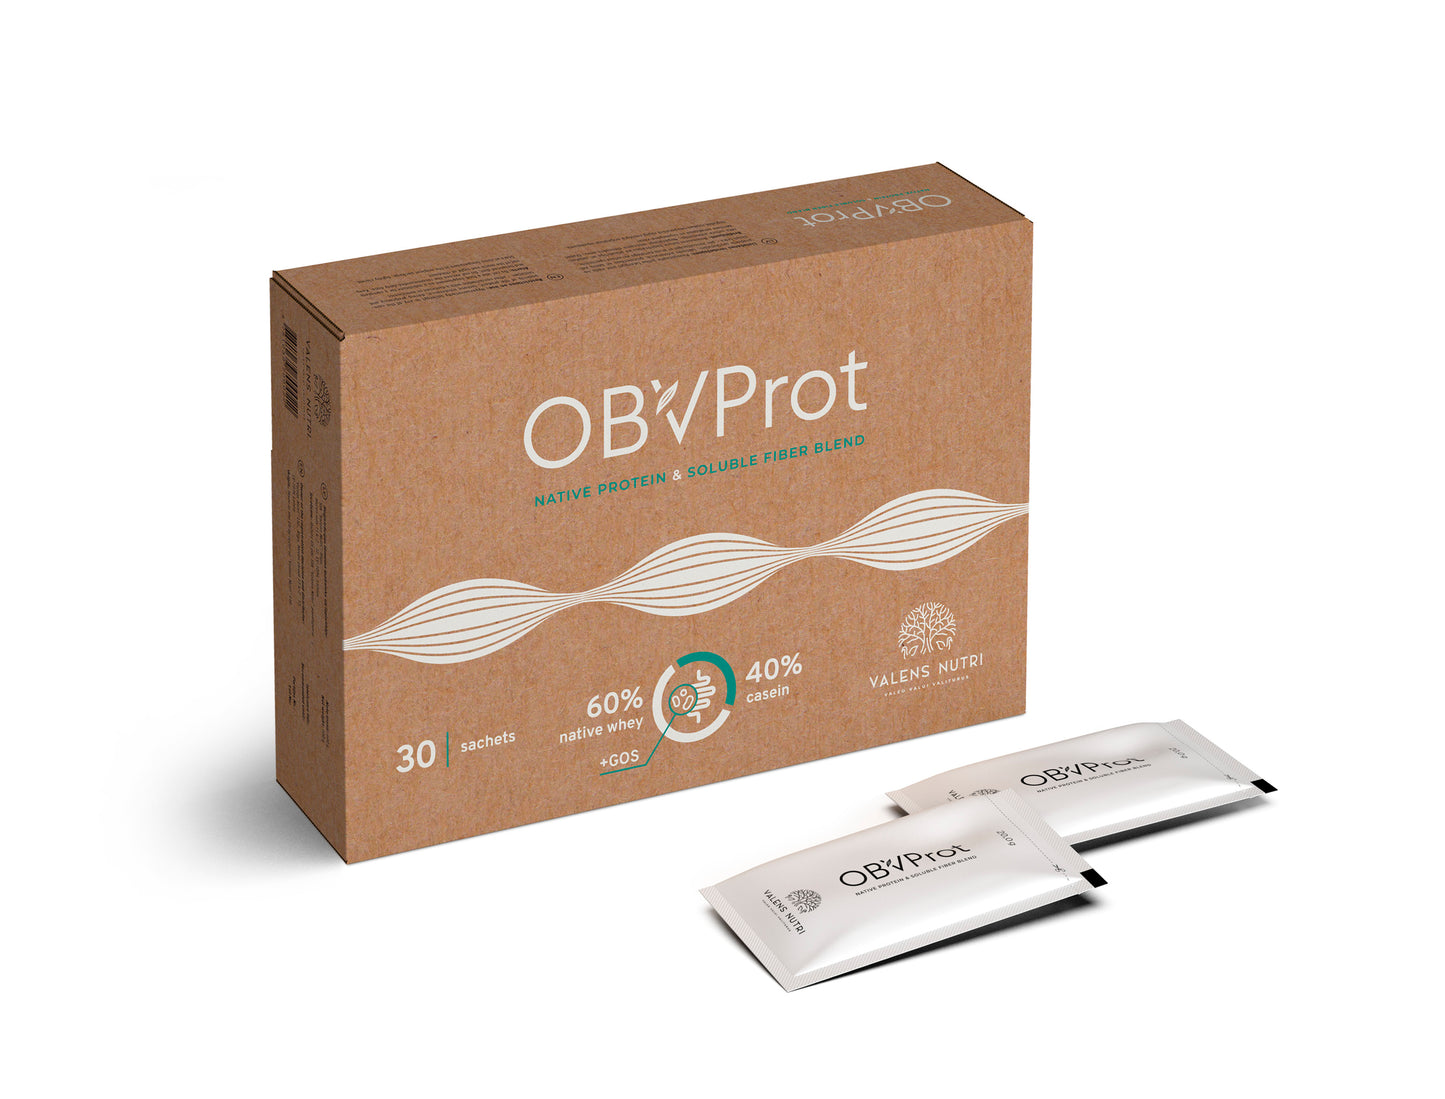 OBVProt | Complete Protein with Fiber | New Granular Formula